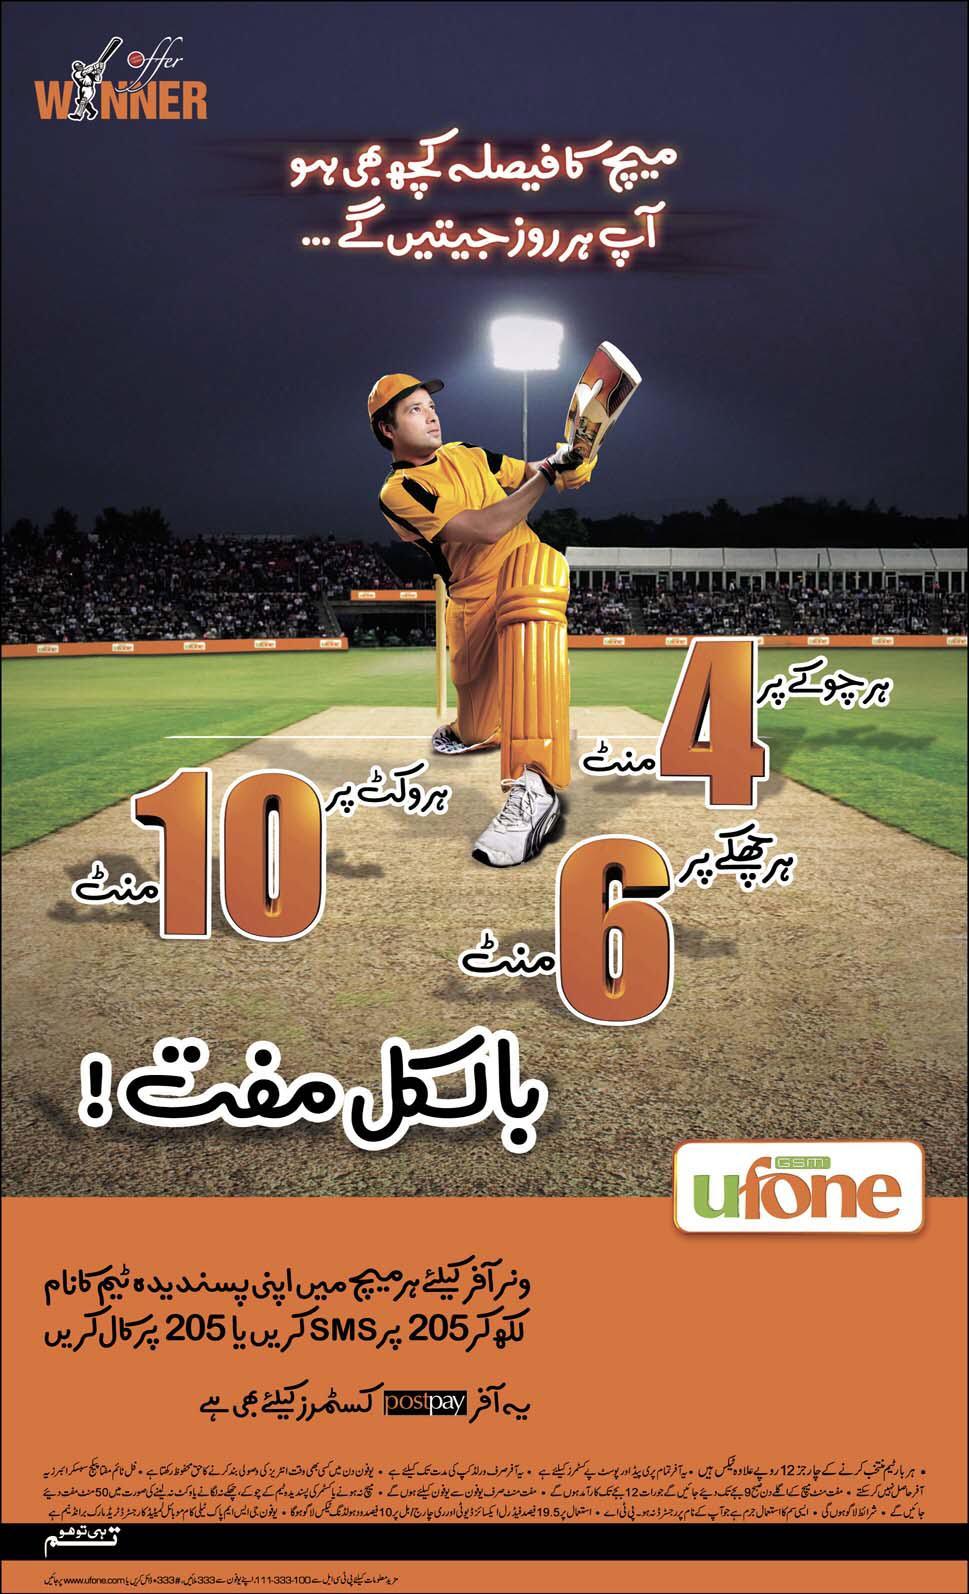 Win Prizes By Ufone in World Cup 2011 - Urdu Advertisement